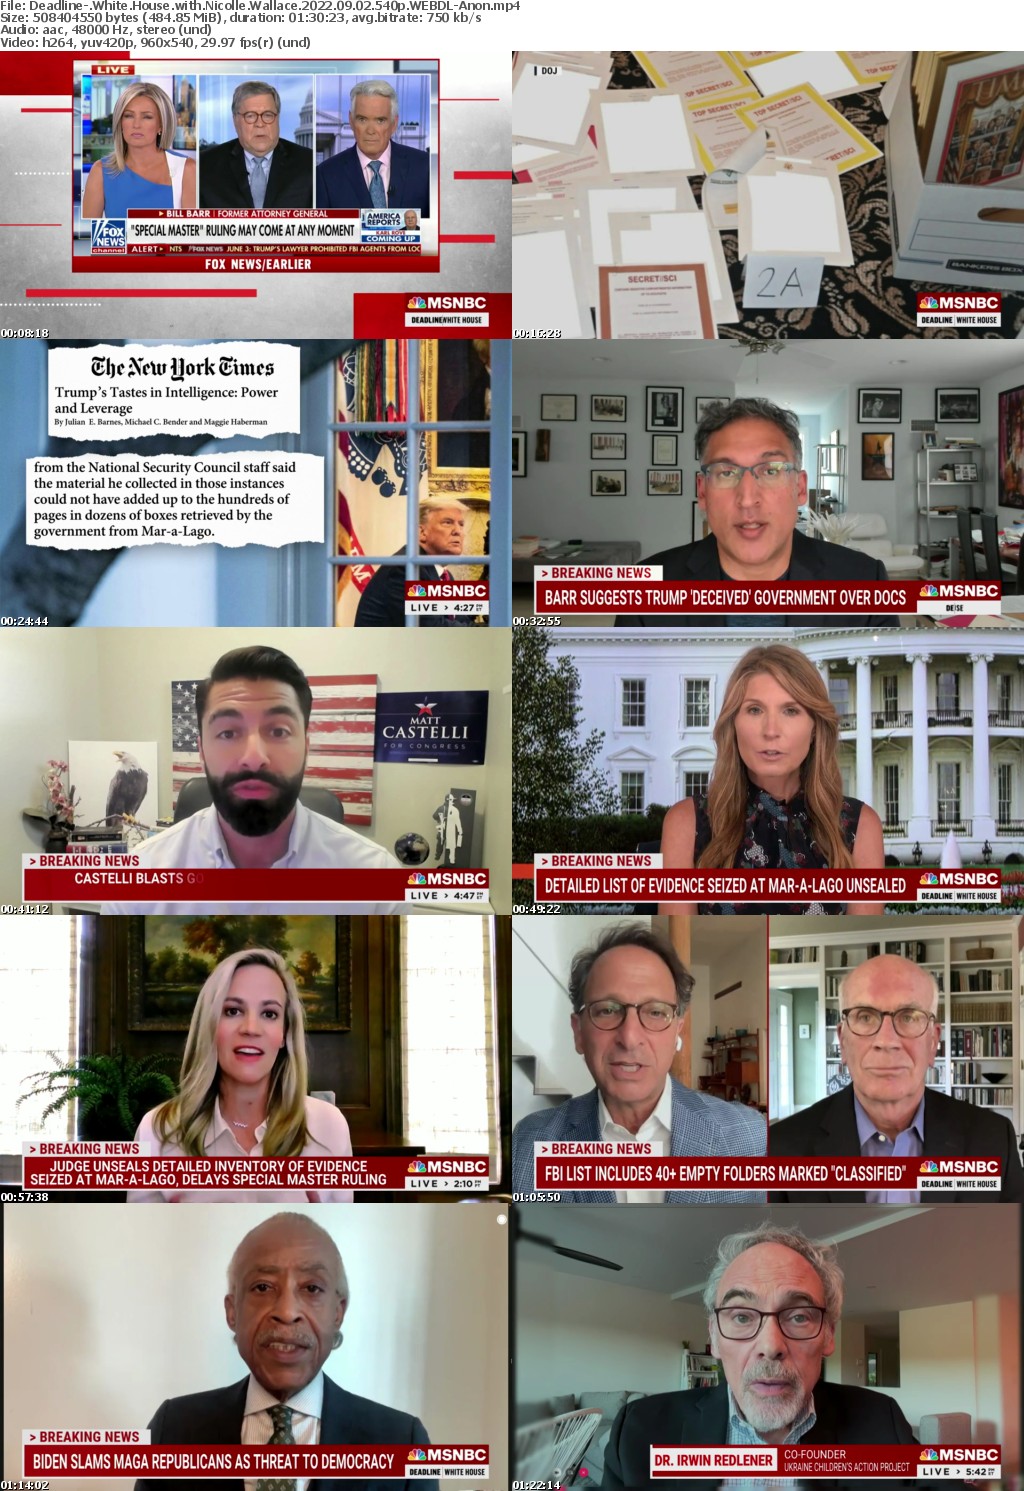 Deadline- White House with Nicolle Wallace 2022 09 02 540p WEBDL-Anon